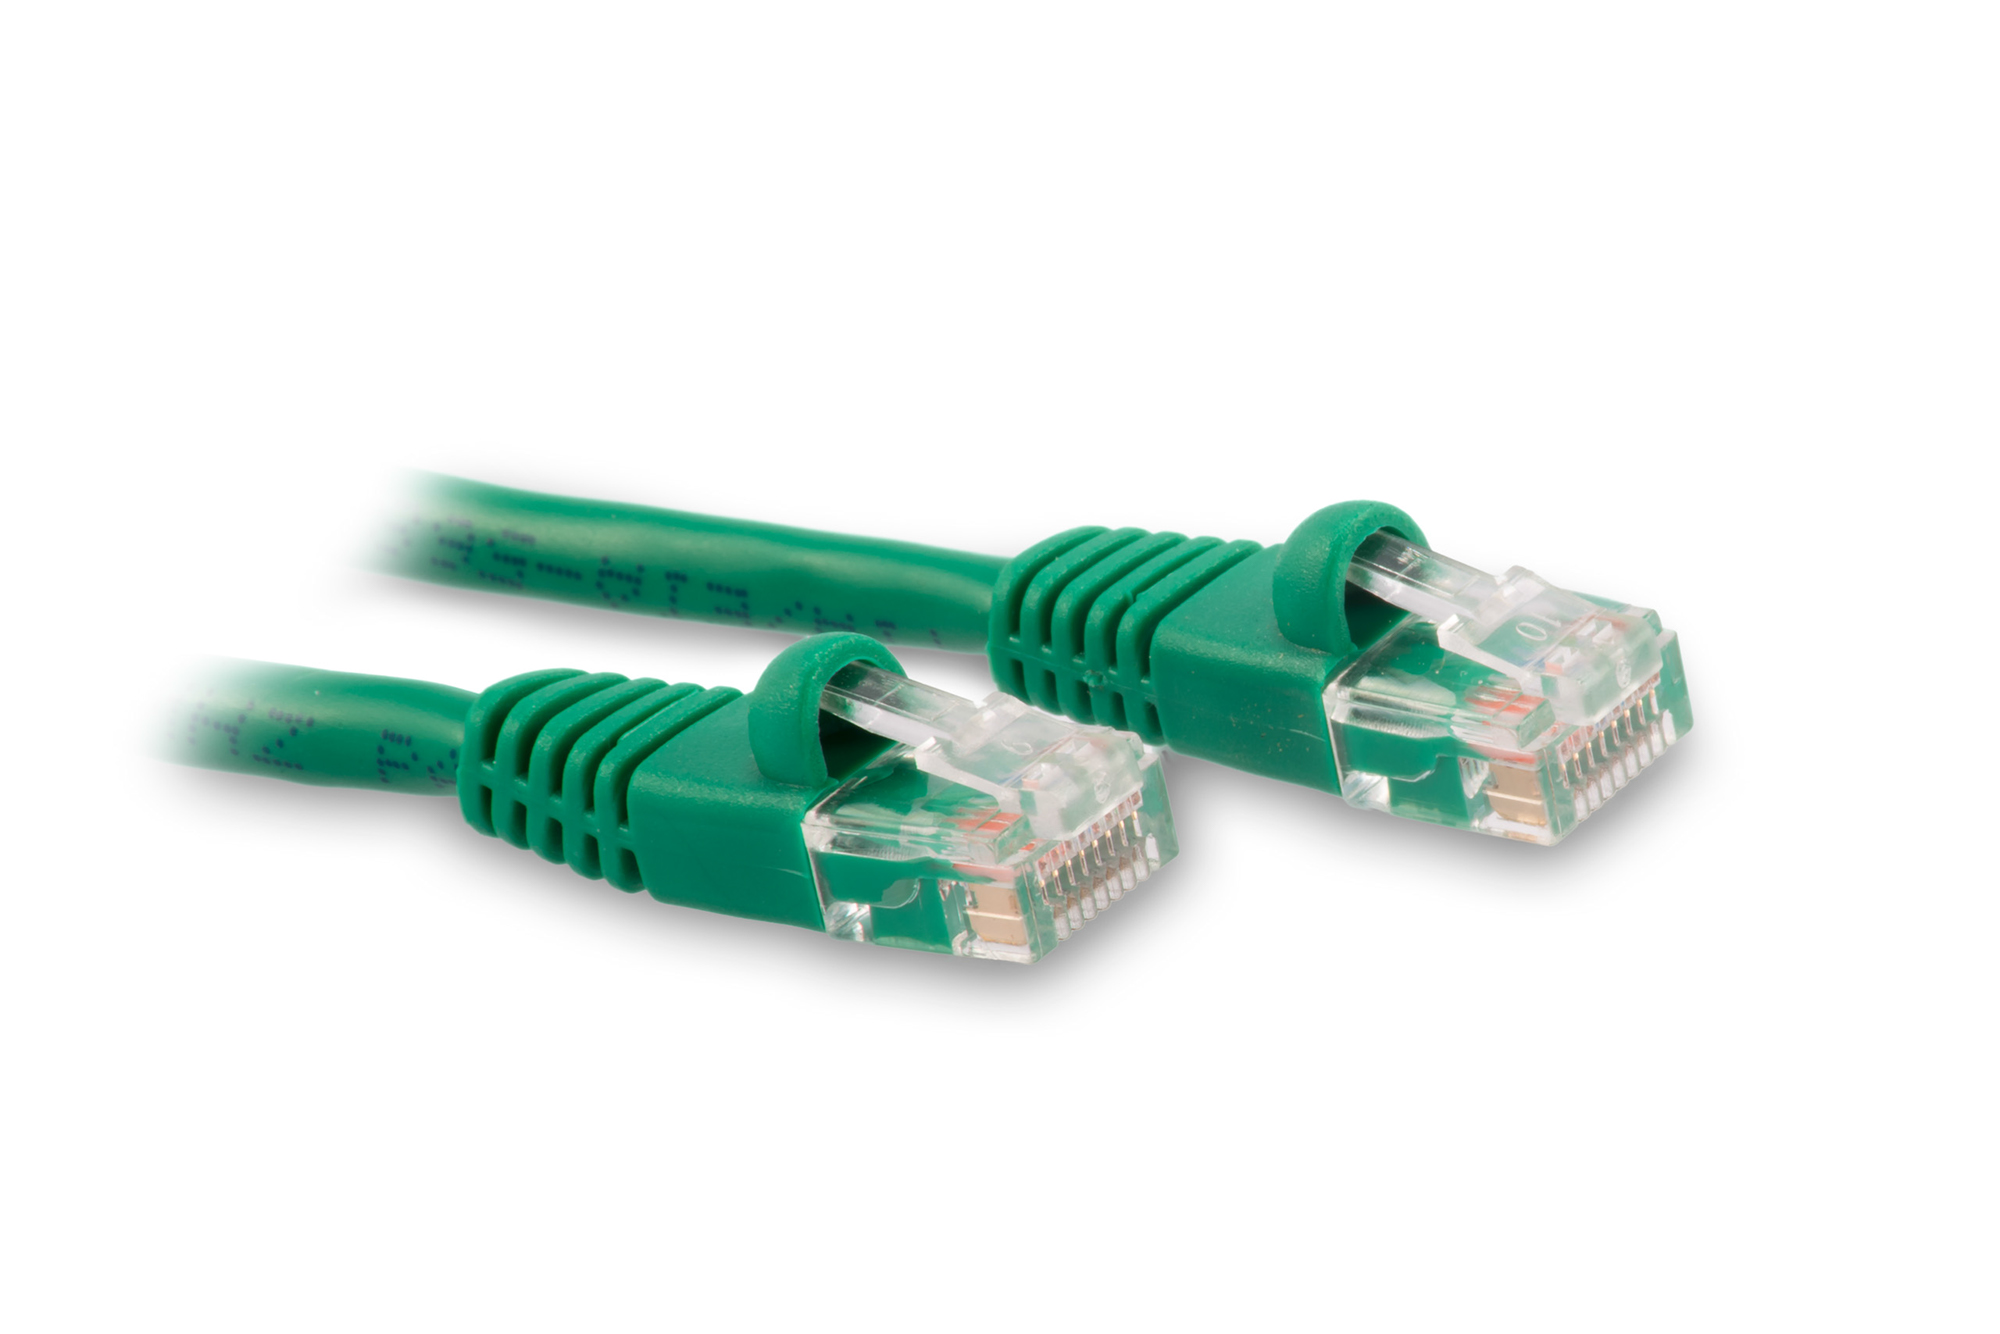 5ft Cat6 Ethernet Patch Cable - Green Color - Snagless Boot, Stranded, RJ45, 550Mhz, 24AWG